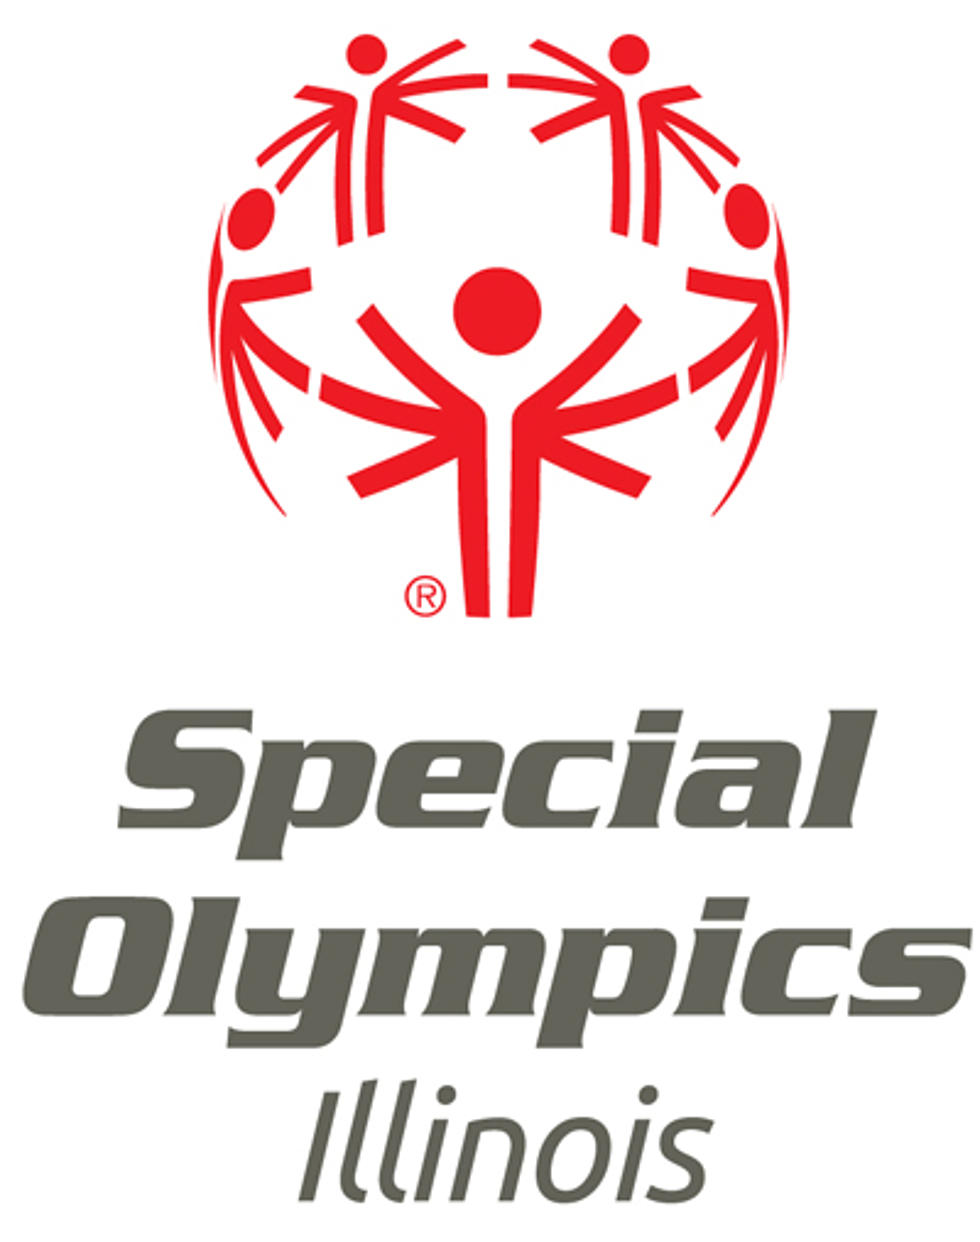 Rockford Wins Gold in Special Olympics World Games 